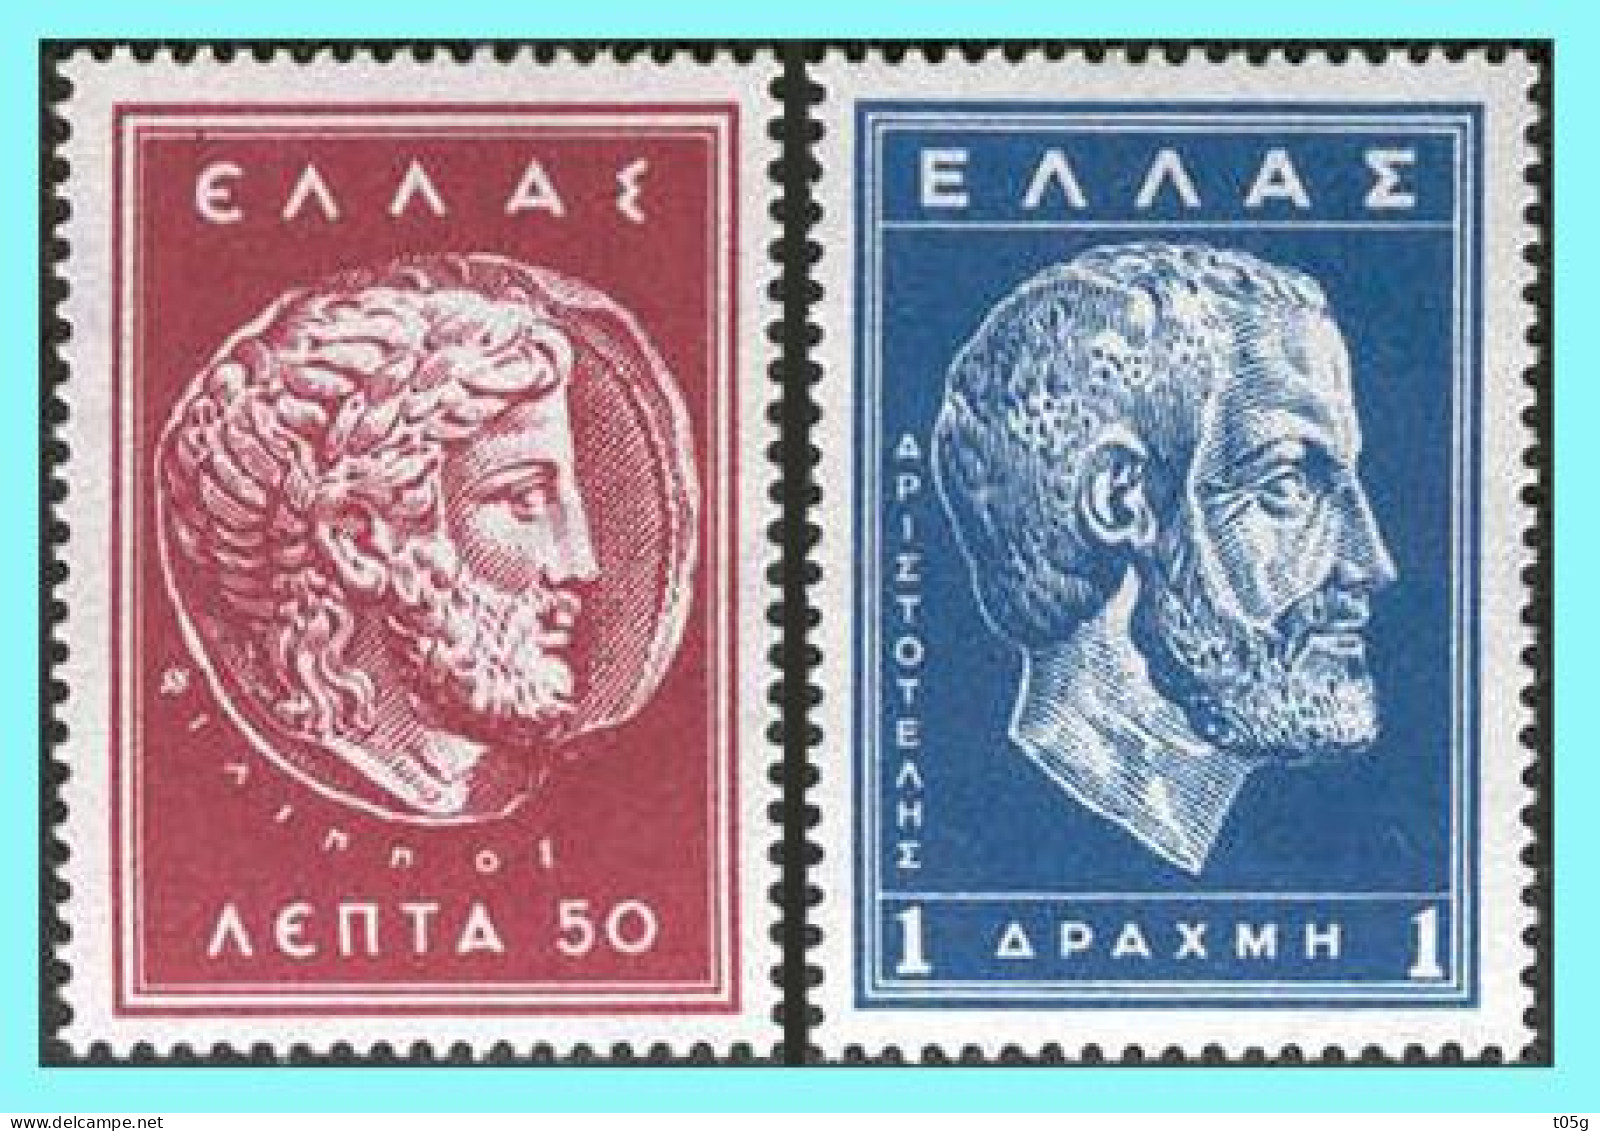 GREECE- GRECE - HELLAS 1956: Compl. Set MNH*"   "Macedonian Cultural Fund" - Charity Issues